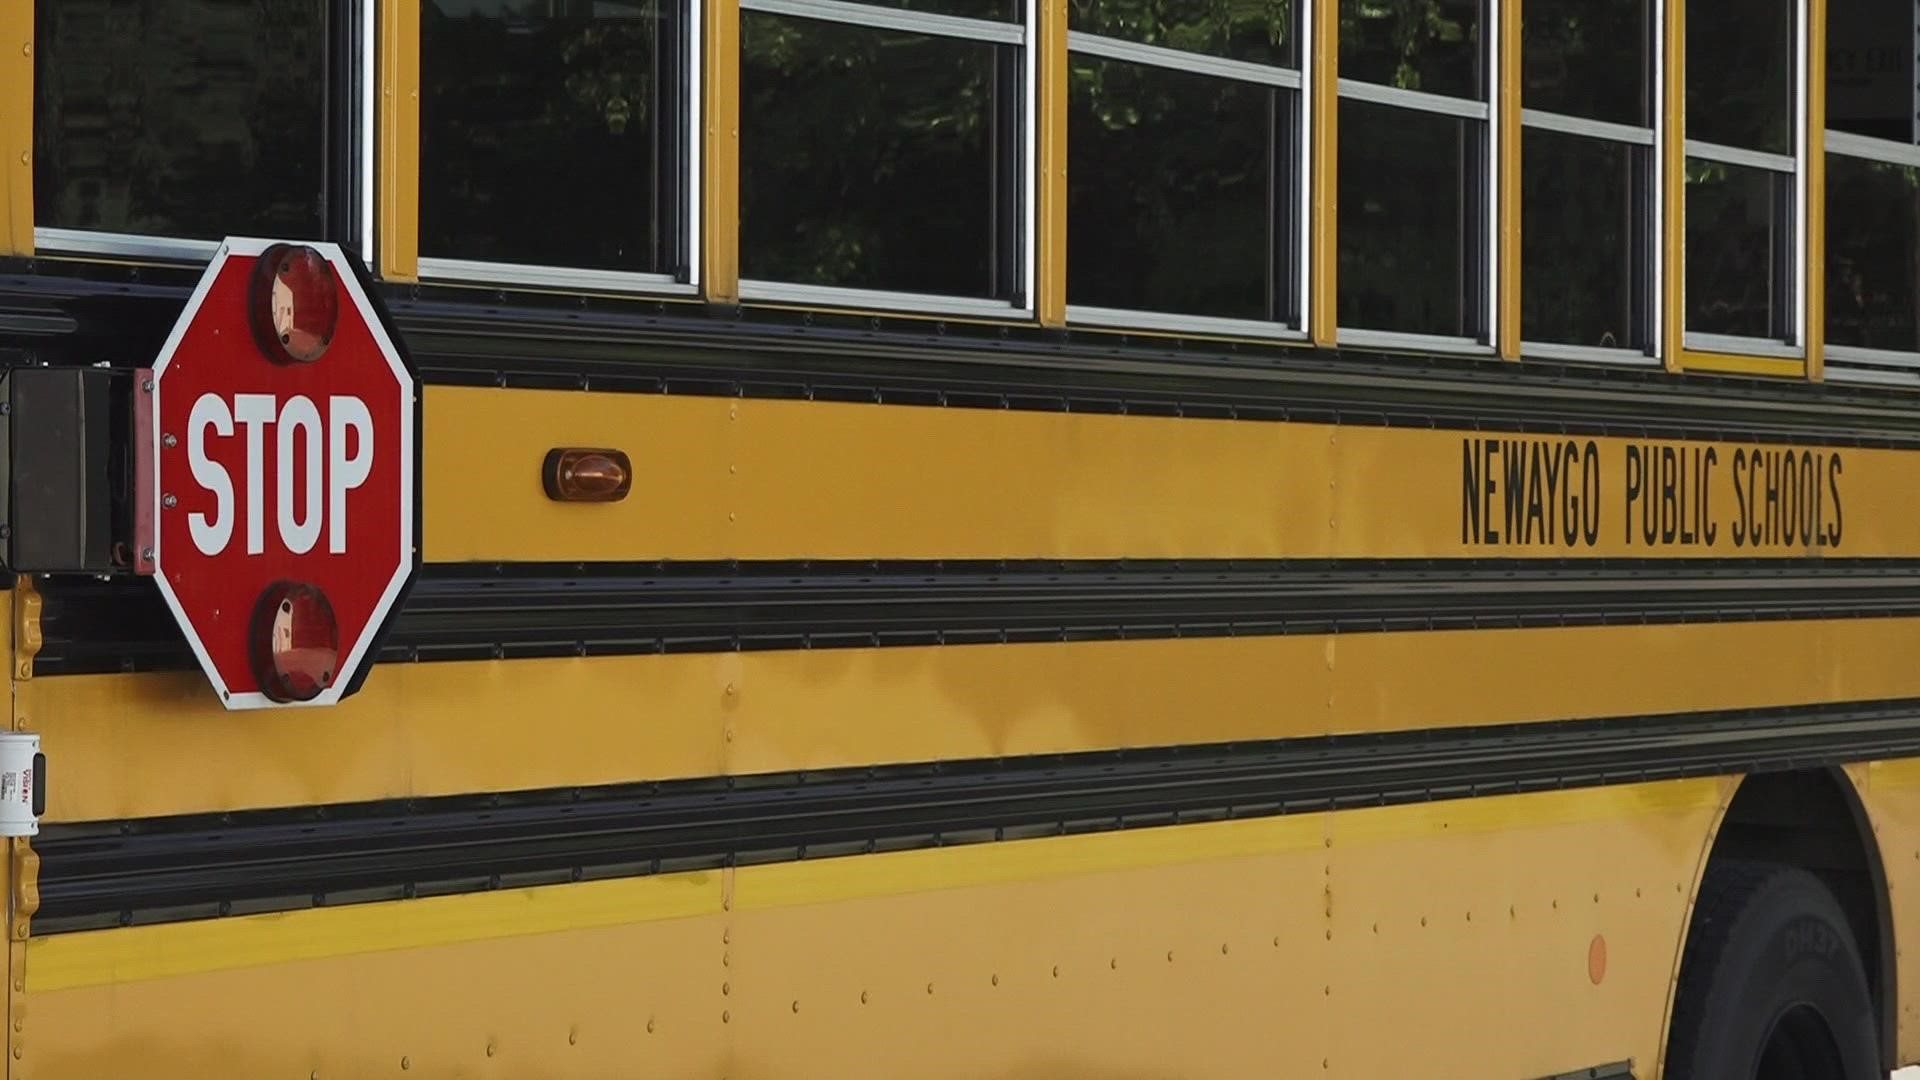 Superintendent Jeff Wright says the district doesn't have a shortage of full-time bus drivers, but they don't have enough substitutes to fill in behind the wheel.